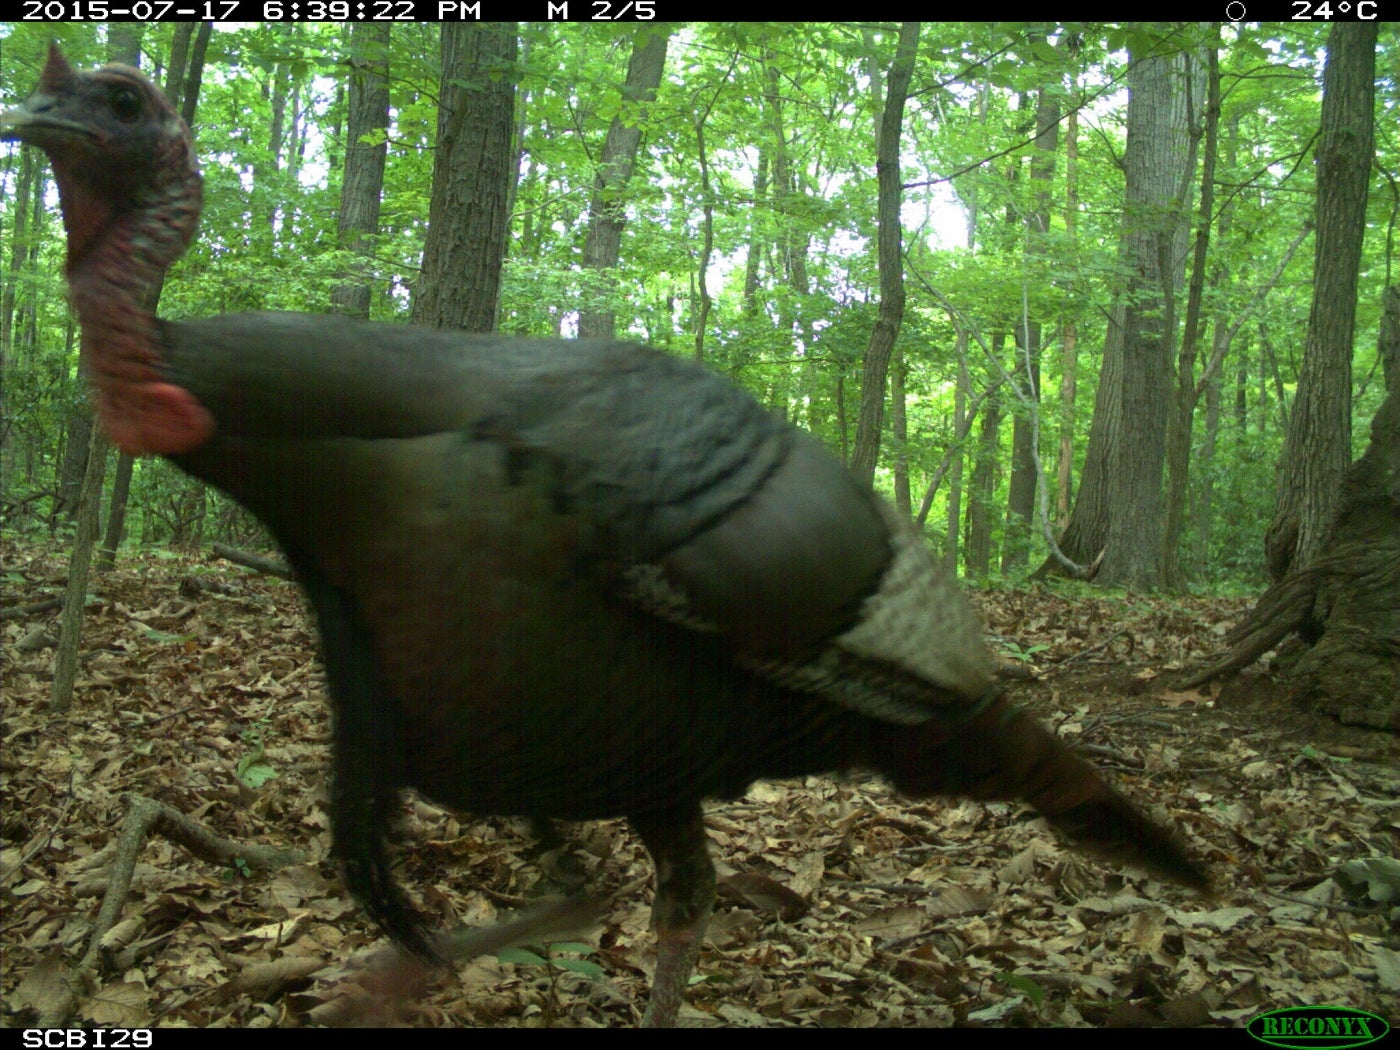 A turkey captured on the Smithsonian Conservation Biology Institute's camera trap in Washington, D.C.